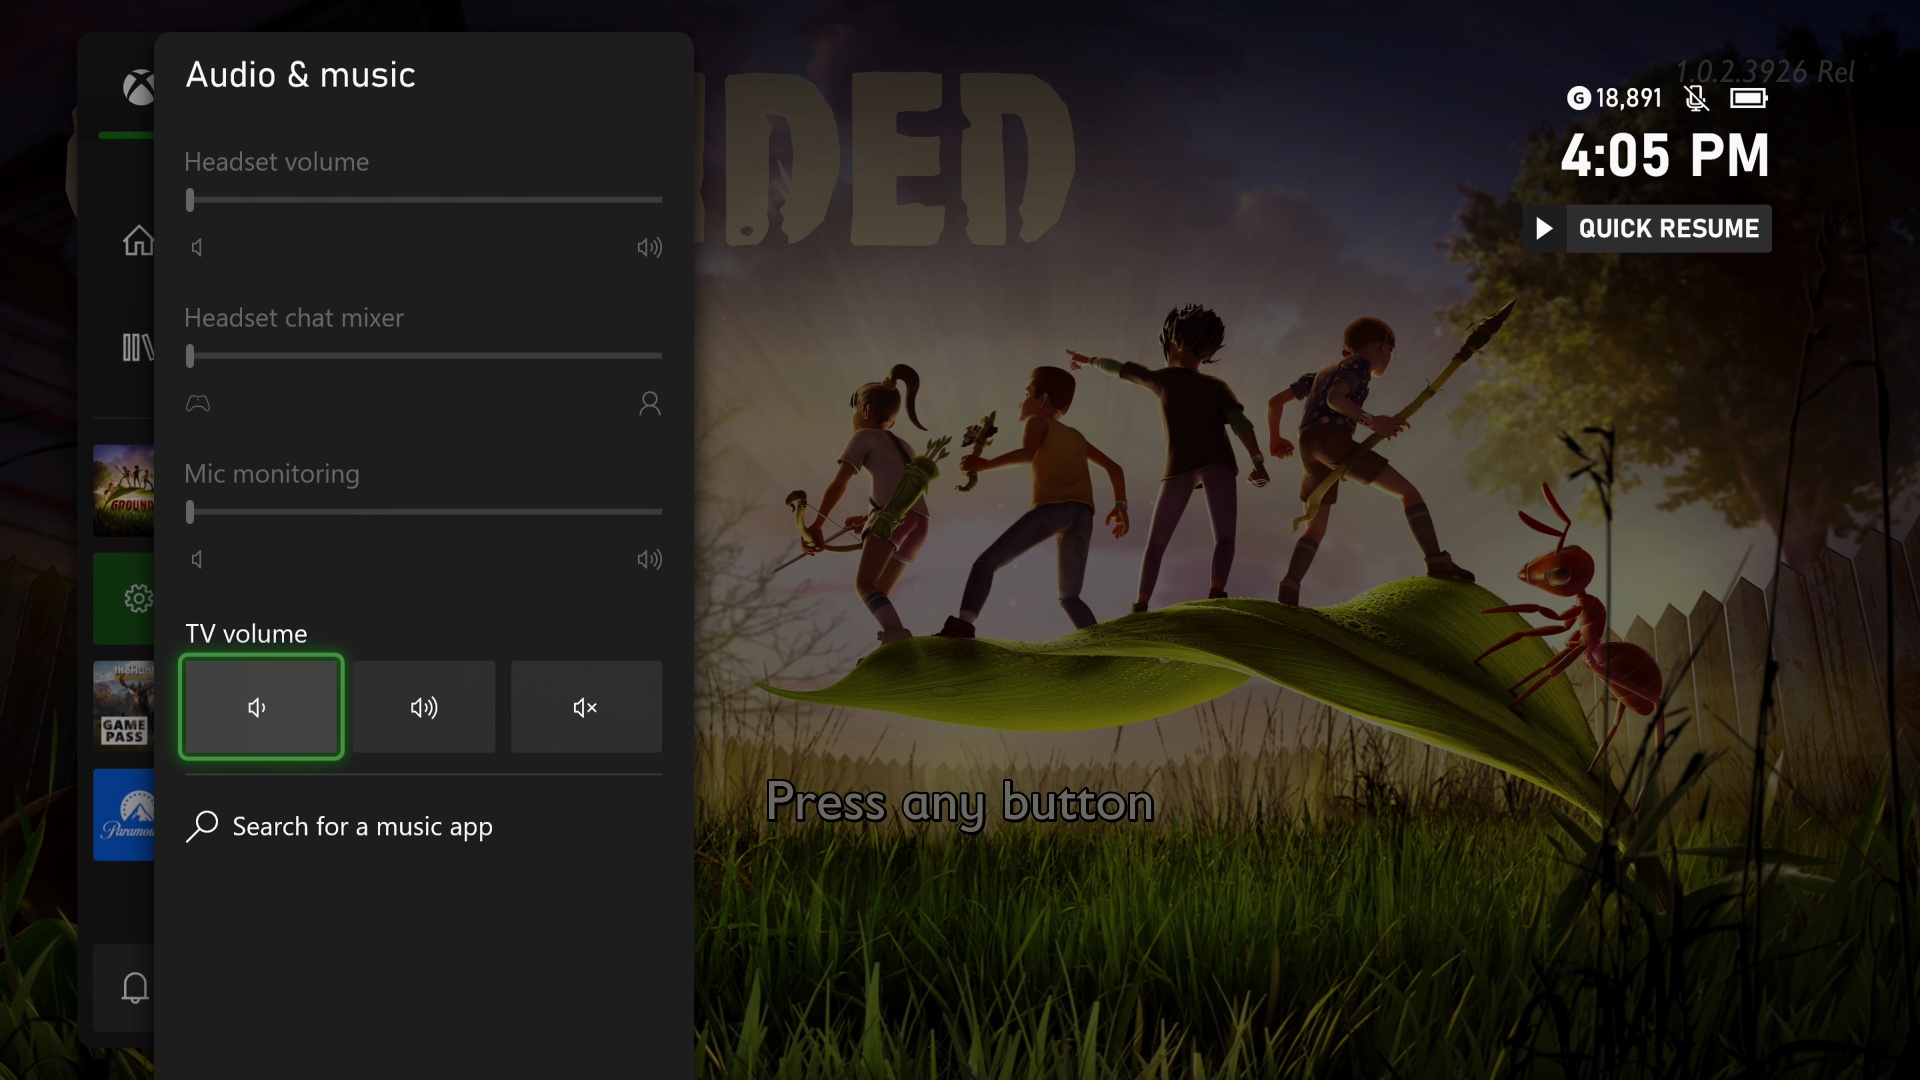 October's Xbox update rolling out now, adds keyboard mapping to controllers